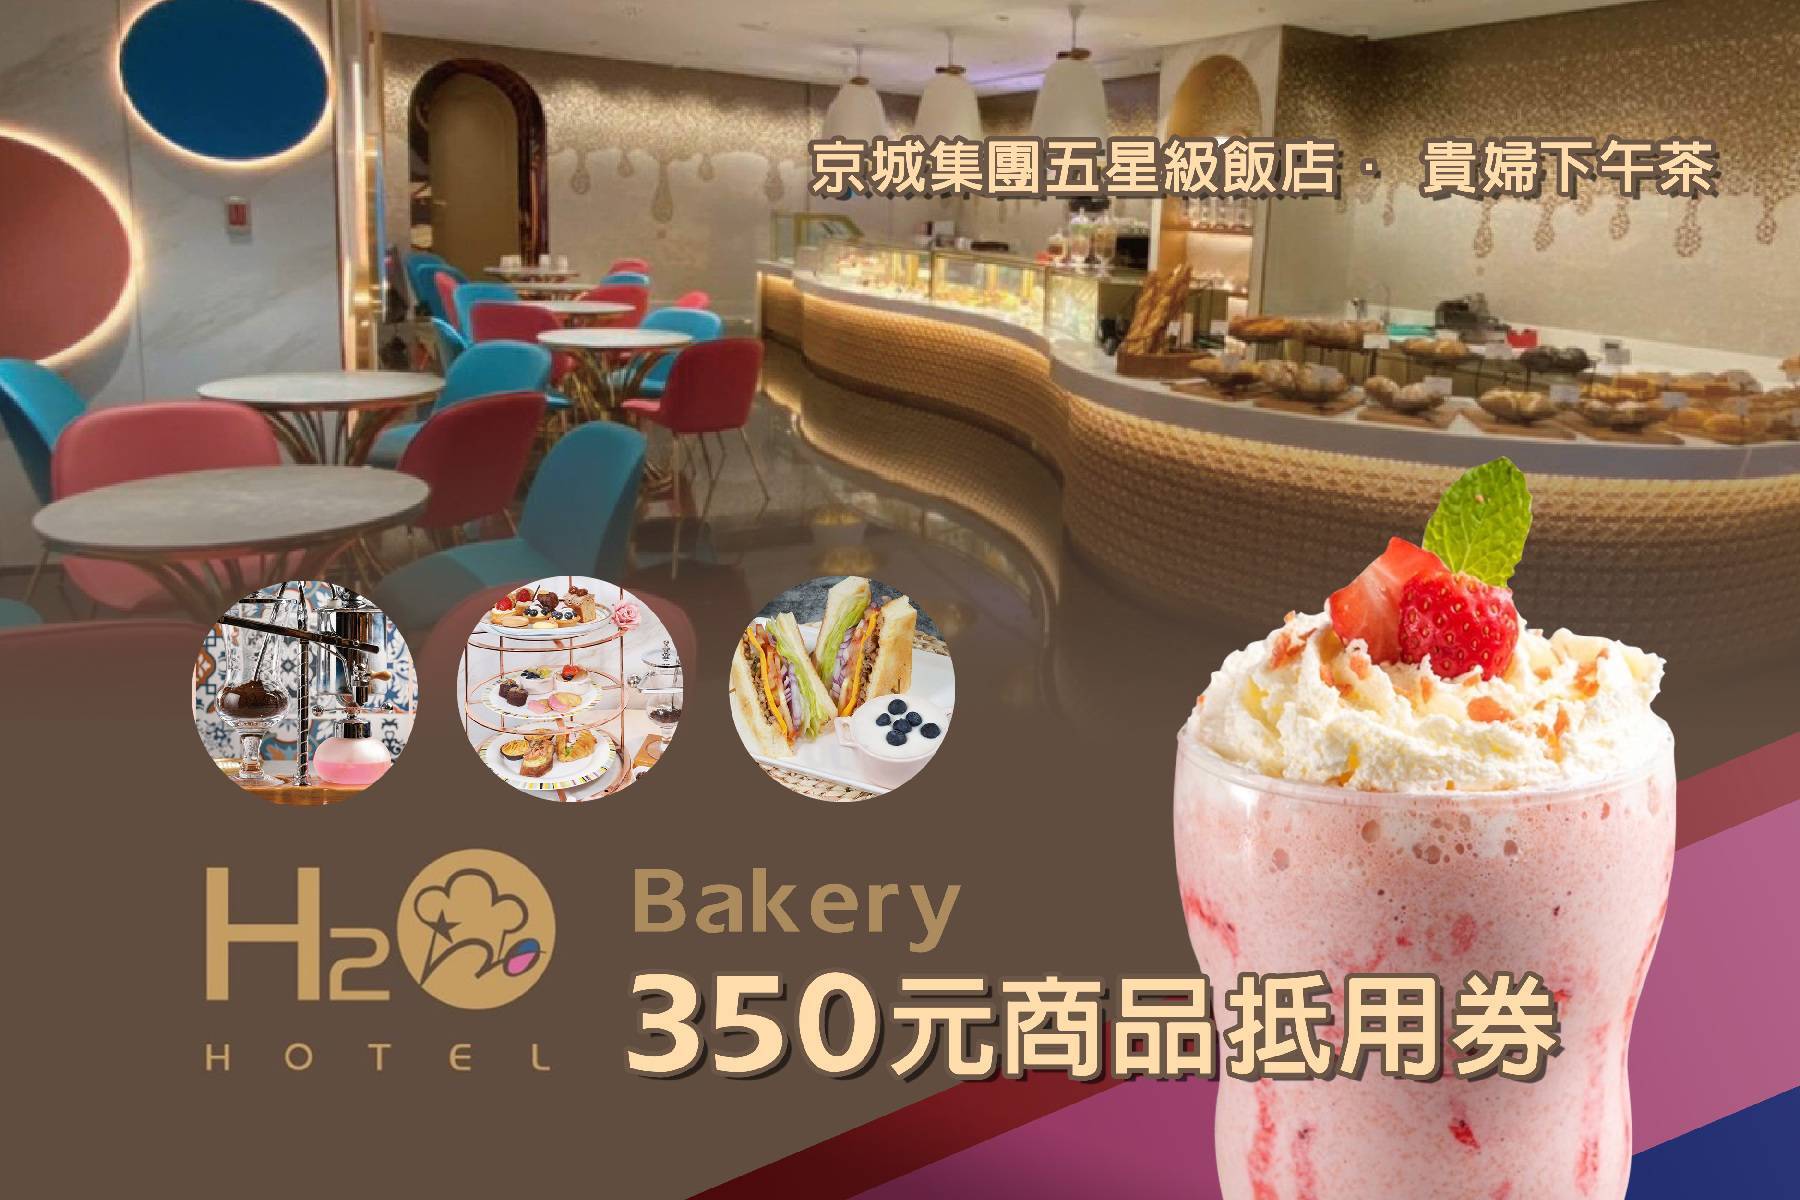 ◆H2O Bakery-350元商品抵用券1